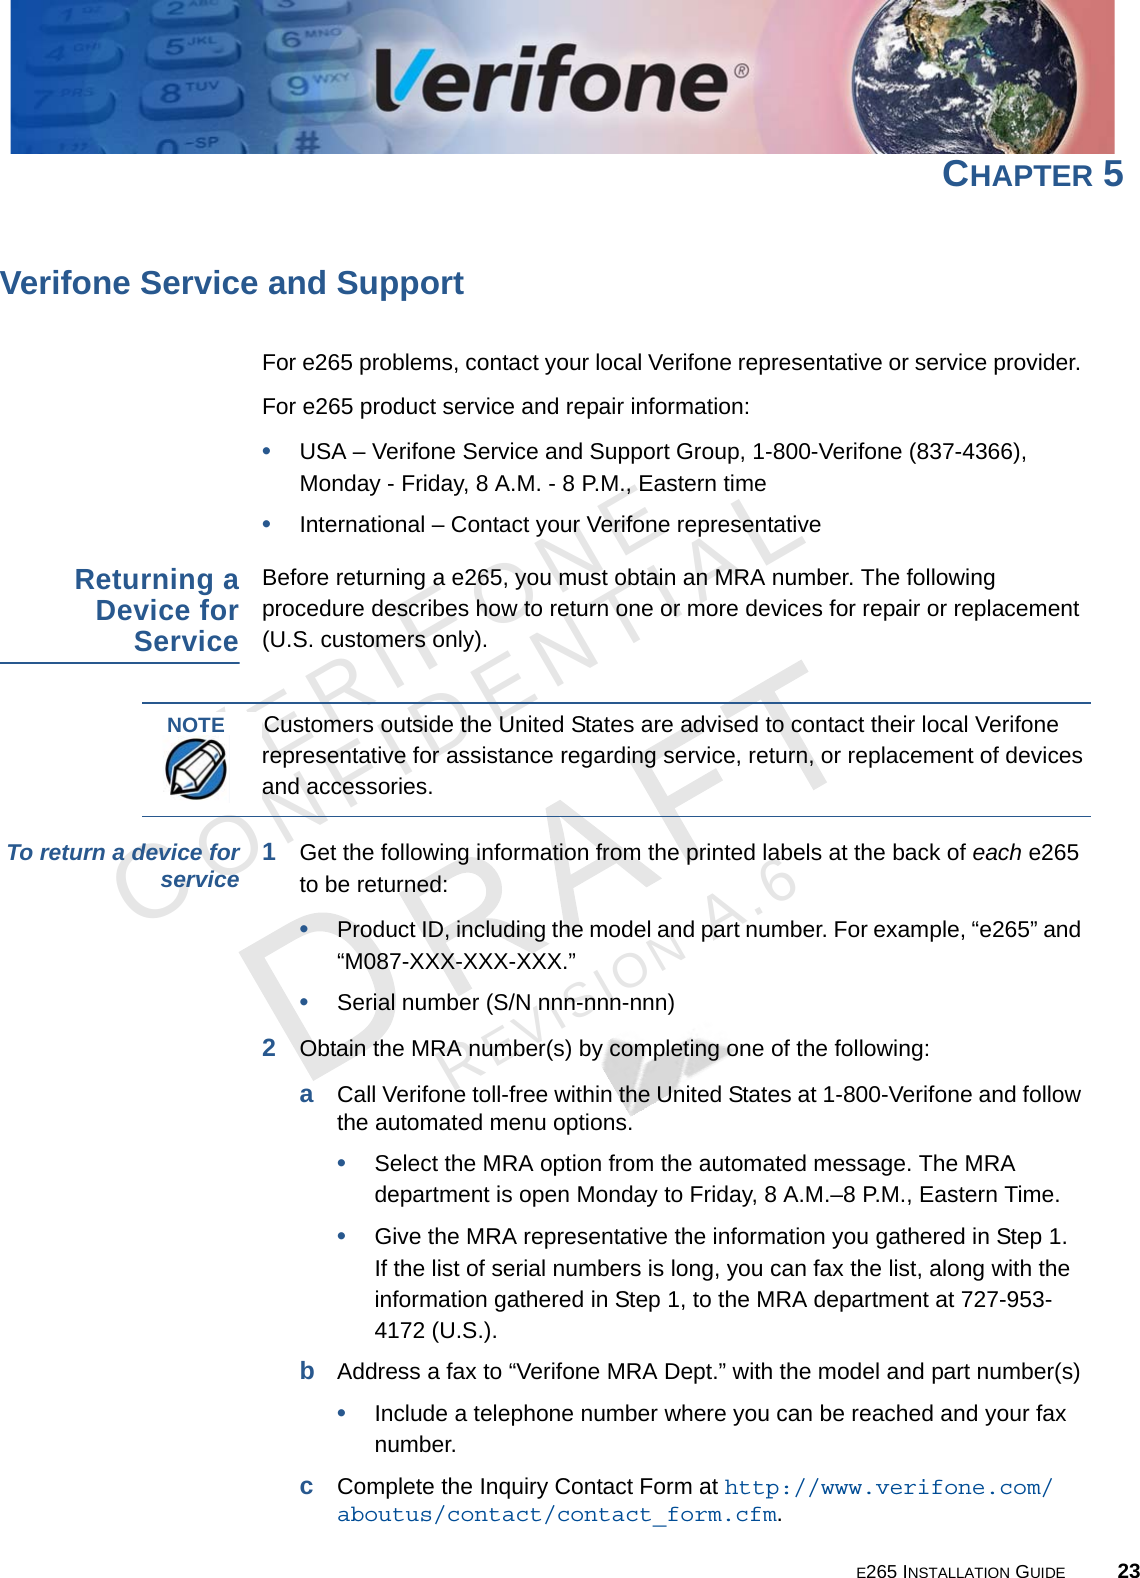 E265 INSTALLATION GUIDE 23VERIFONECONFIDENTIALREVISION A.6 CHAPTER 5Verifone Service and SupportFor e265 problems, contact your local Verifone representative or service provider. For e265 product service and repair information:•USA – Verifone Service and Support Group, 1-800-Verifone (837-4366),  Monday - Friday, 8 A.M. - 8 P.M., Eastern time•International – Contact your Verifone representative Returning a Device for ServiceBefore returning a e265, you must obtain an MRA number. The following procedure describes how to return one or more devices for repair or replacement (U.S. customers only). To return a device for service 1Get the following information from the printed labels at the back of each e265 to be returned:•Product ID, including the model and part number. For example, “e265” and “M087-XXX-XXX-XXX.”•Serial number (S/N nnn-nnn-nnn)2Obtain the MRA number(s) by completing one of the following:aCall Verifone toll-free within the United States at 1-800-Verifone and follow the automated menu options.•Select the MRA option from the automated message. The MRA department is open Monday to Friday, 8 A.M.–8 P.M., Eastern Time.•Give the MRA representative the information you gathered in Step 1. If the list of serial numbers is long, you can fax the list, along with the information gathered in Step 1, to the MRA department at 727-953-4172 (U.S.).bAddress a fax to “Verifone MRA Dept.” with the model and part number(s)•Include a telephone number where you can be reached and your fax number.cComplete the Inquiry Contact Form at http://www.verifone.com/aboutus/contact/contact_form.cfm.NOTECustomers outside the United States are advised to contact their local Verifone representative for assistance regarding service, return, or replacement of devices and accessories.